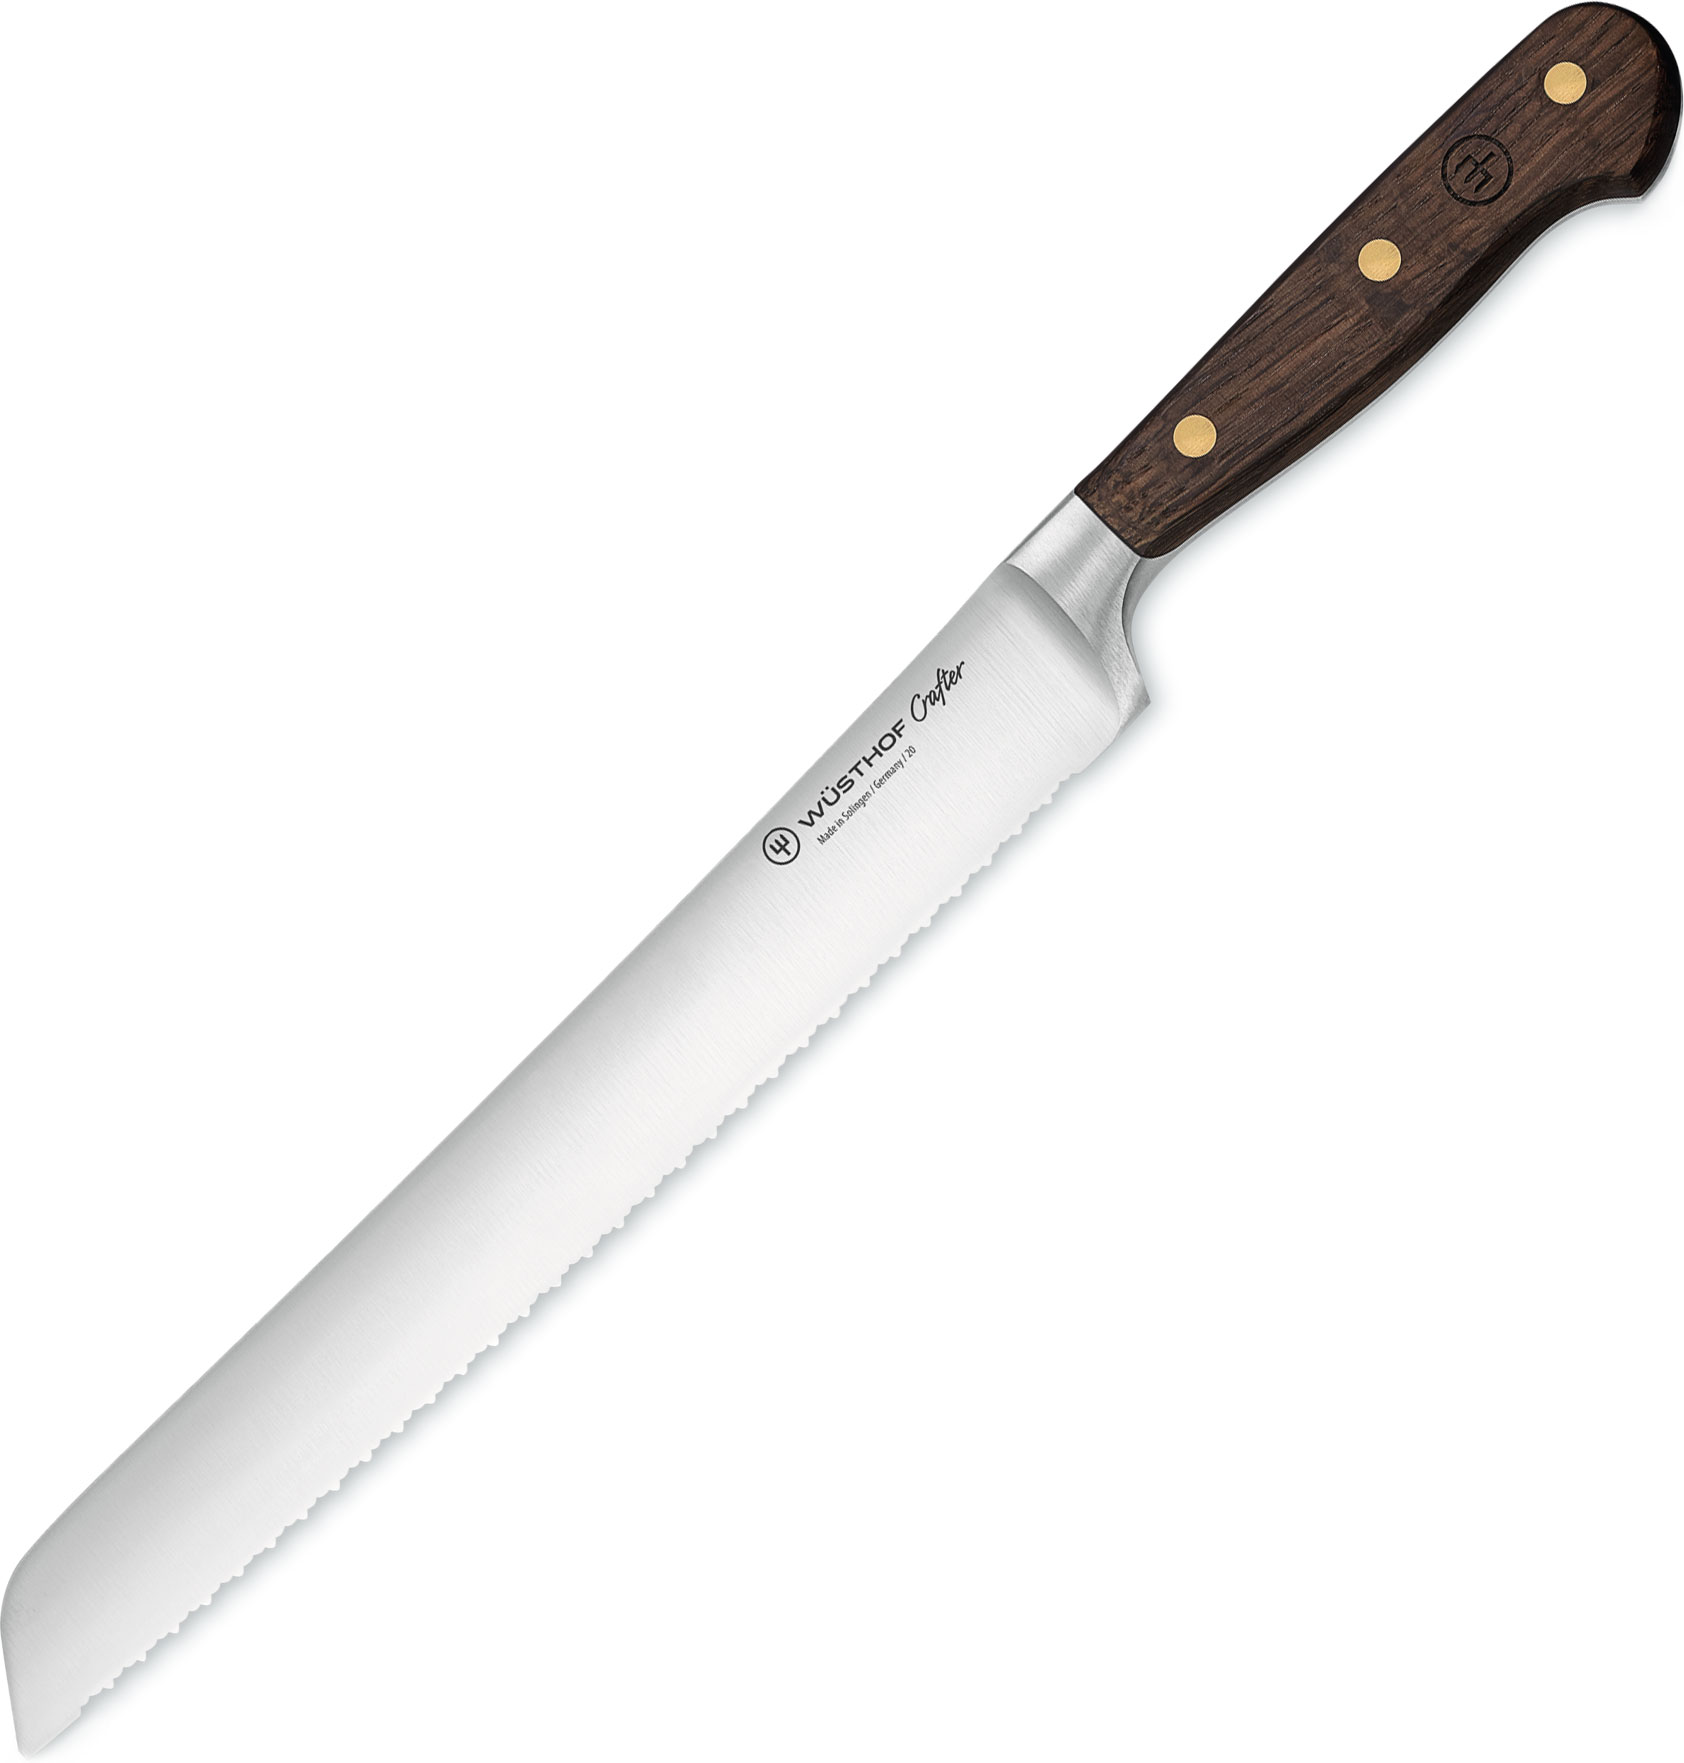 Wüsthof Crafter Bread Knife 23cm Double Serrated 1010801123